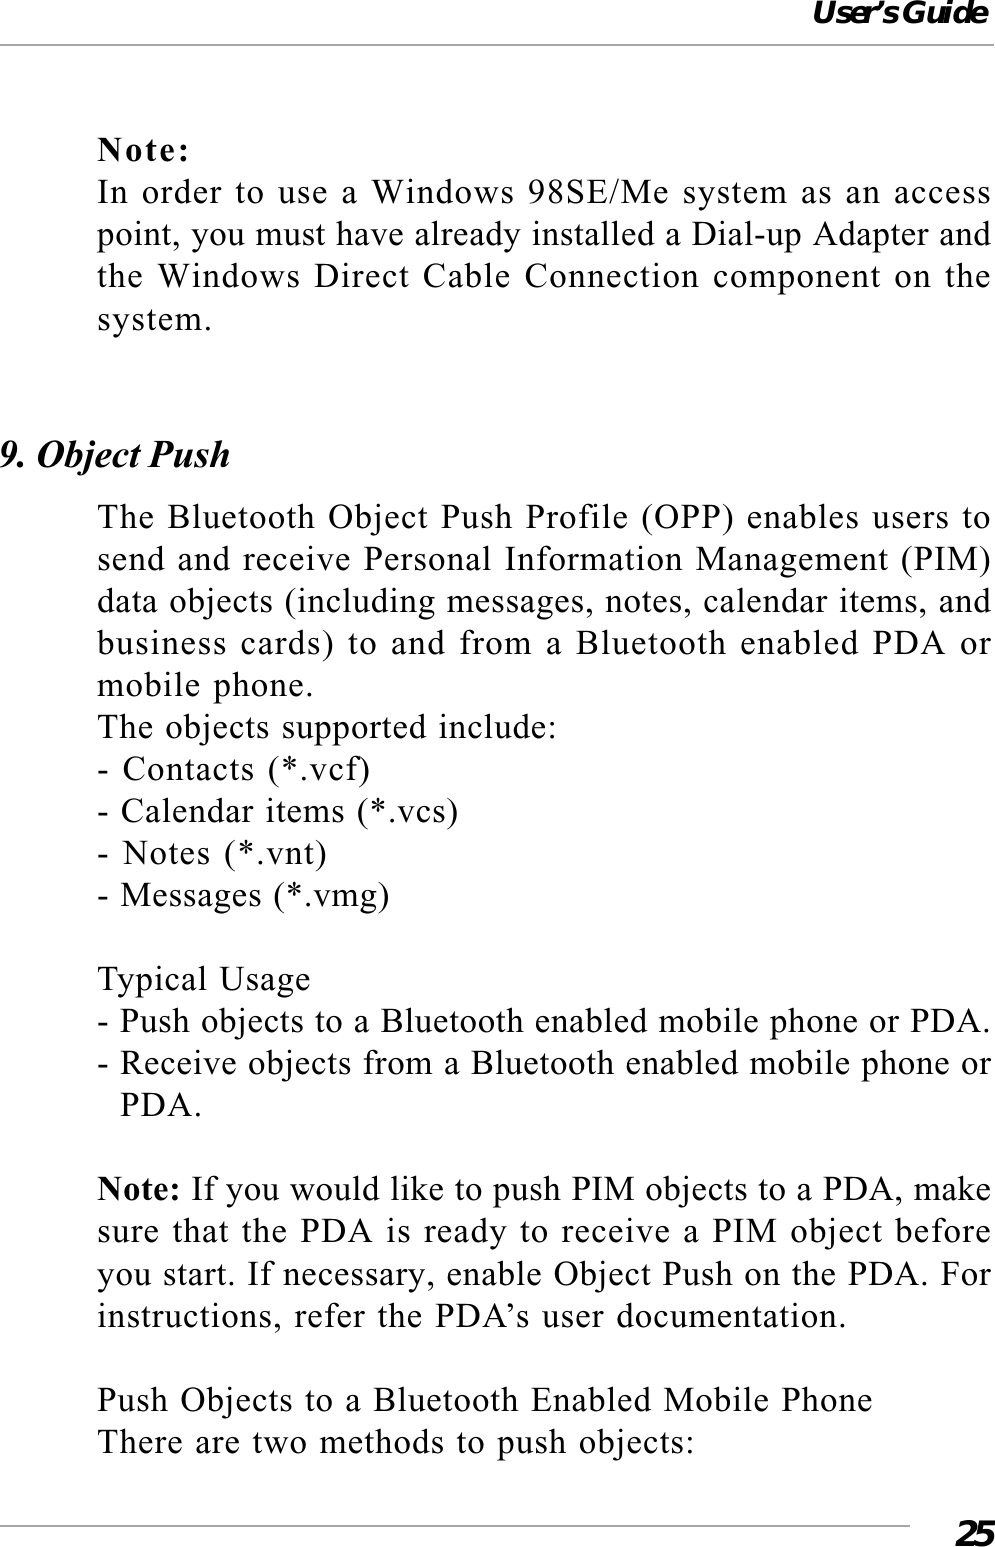 User’s Guide25Note:In order to use a Windows 98SE/Me system as an accesspoint, you must have already installed a Dial-up Adapter andthe Windows Direct Cable Connection component on thesystem.9. Object PushThe Bluetooth Object Push Profile (OPP) enables users tosend and receive Personal Information Management (PIM)data objects (including messages, notes, calendar items, andbusiness cards) to and from a Bluetooth enabled PDA ormobile phone.The objects supported include:- Contacts (*.vcf)- Calendar items (*.vcs)- Notes (*.vnt)- Messages (*.vmg)Typical Usage- Push objects to a Bluetooth enabled mobile phone or PDA.- Receive objects from a Bluetooth enabled mobile phone or  PDA.Note: If you would like to push PIM objects to a PDA, makesure that the PDA is ready to receive a PIM object beforeyou start. If necessary, enable Object Push on the PDA. Forinstructions, refer the PDA’s user documentation.Push Objects to a Bluetooth Enabled Mobile PhoneThere are two methods to push objects: